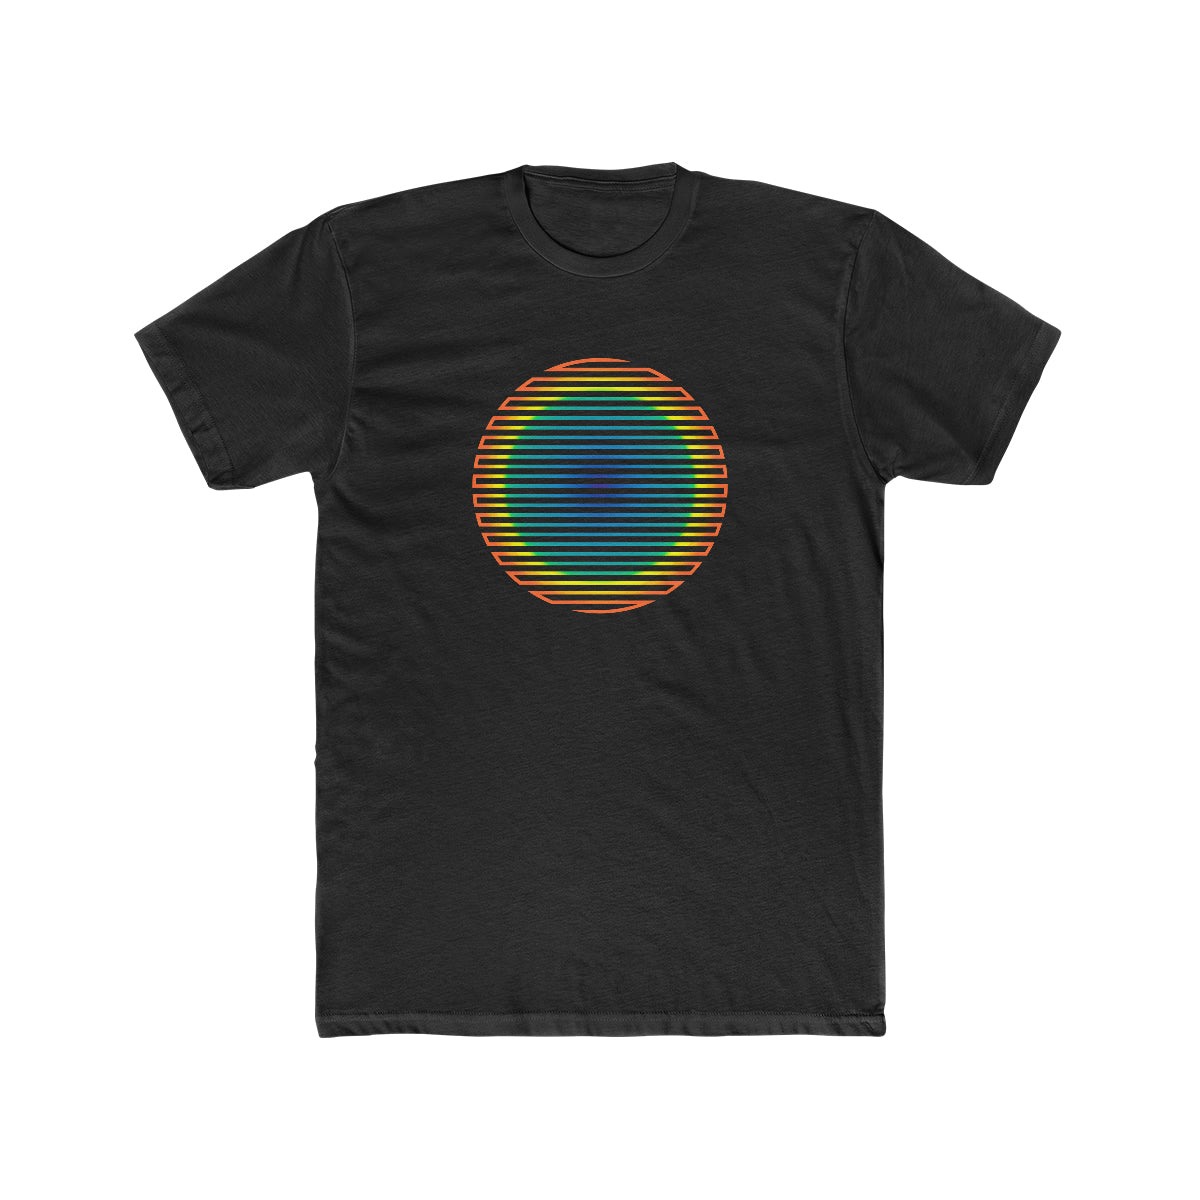 Yellowstone National Park T-Shirt - Grand Prismatic Spring Limited Edition